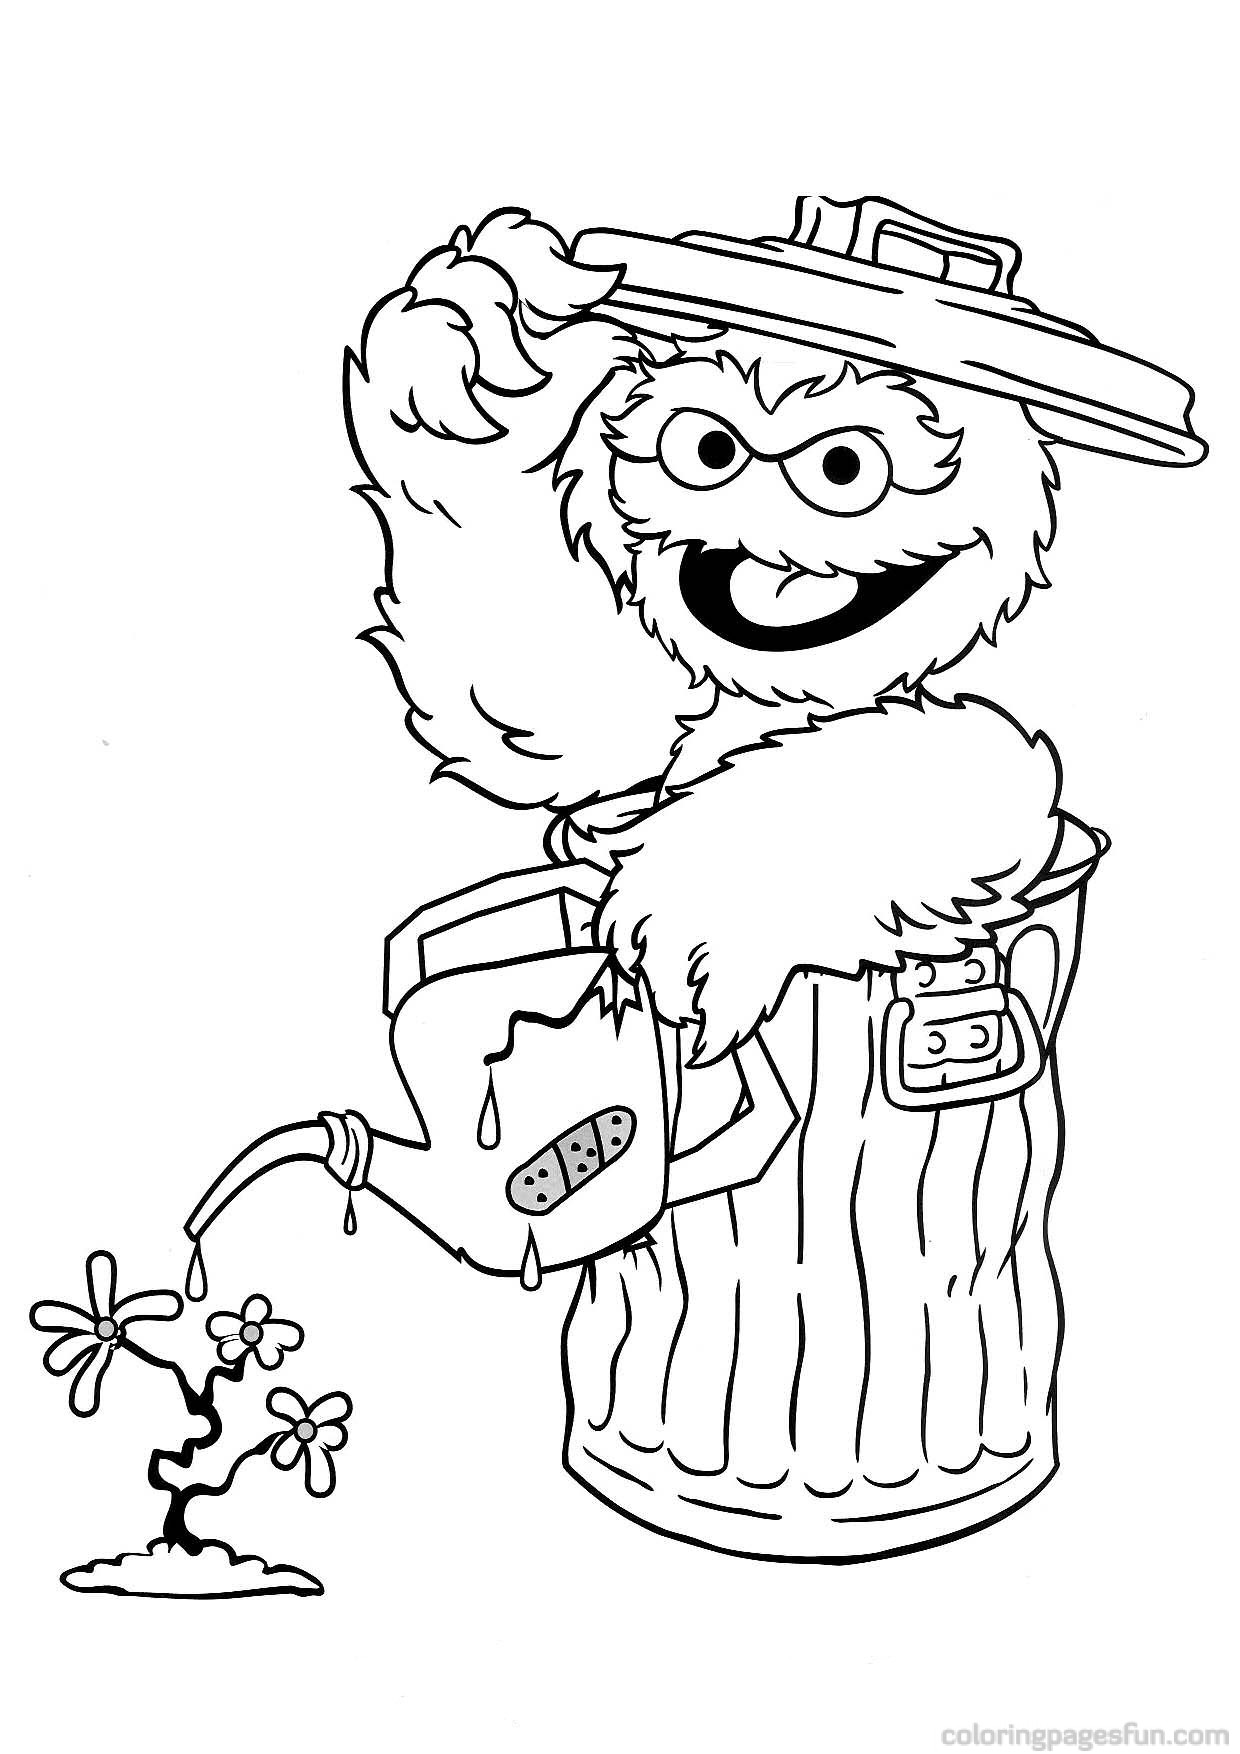 sesame-street-coloring-page